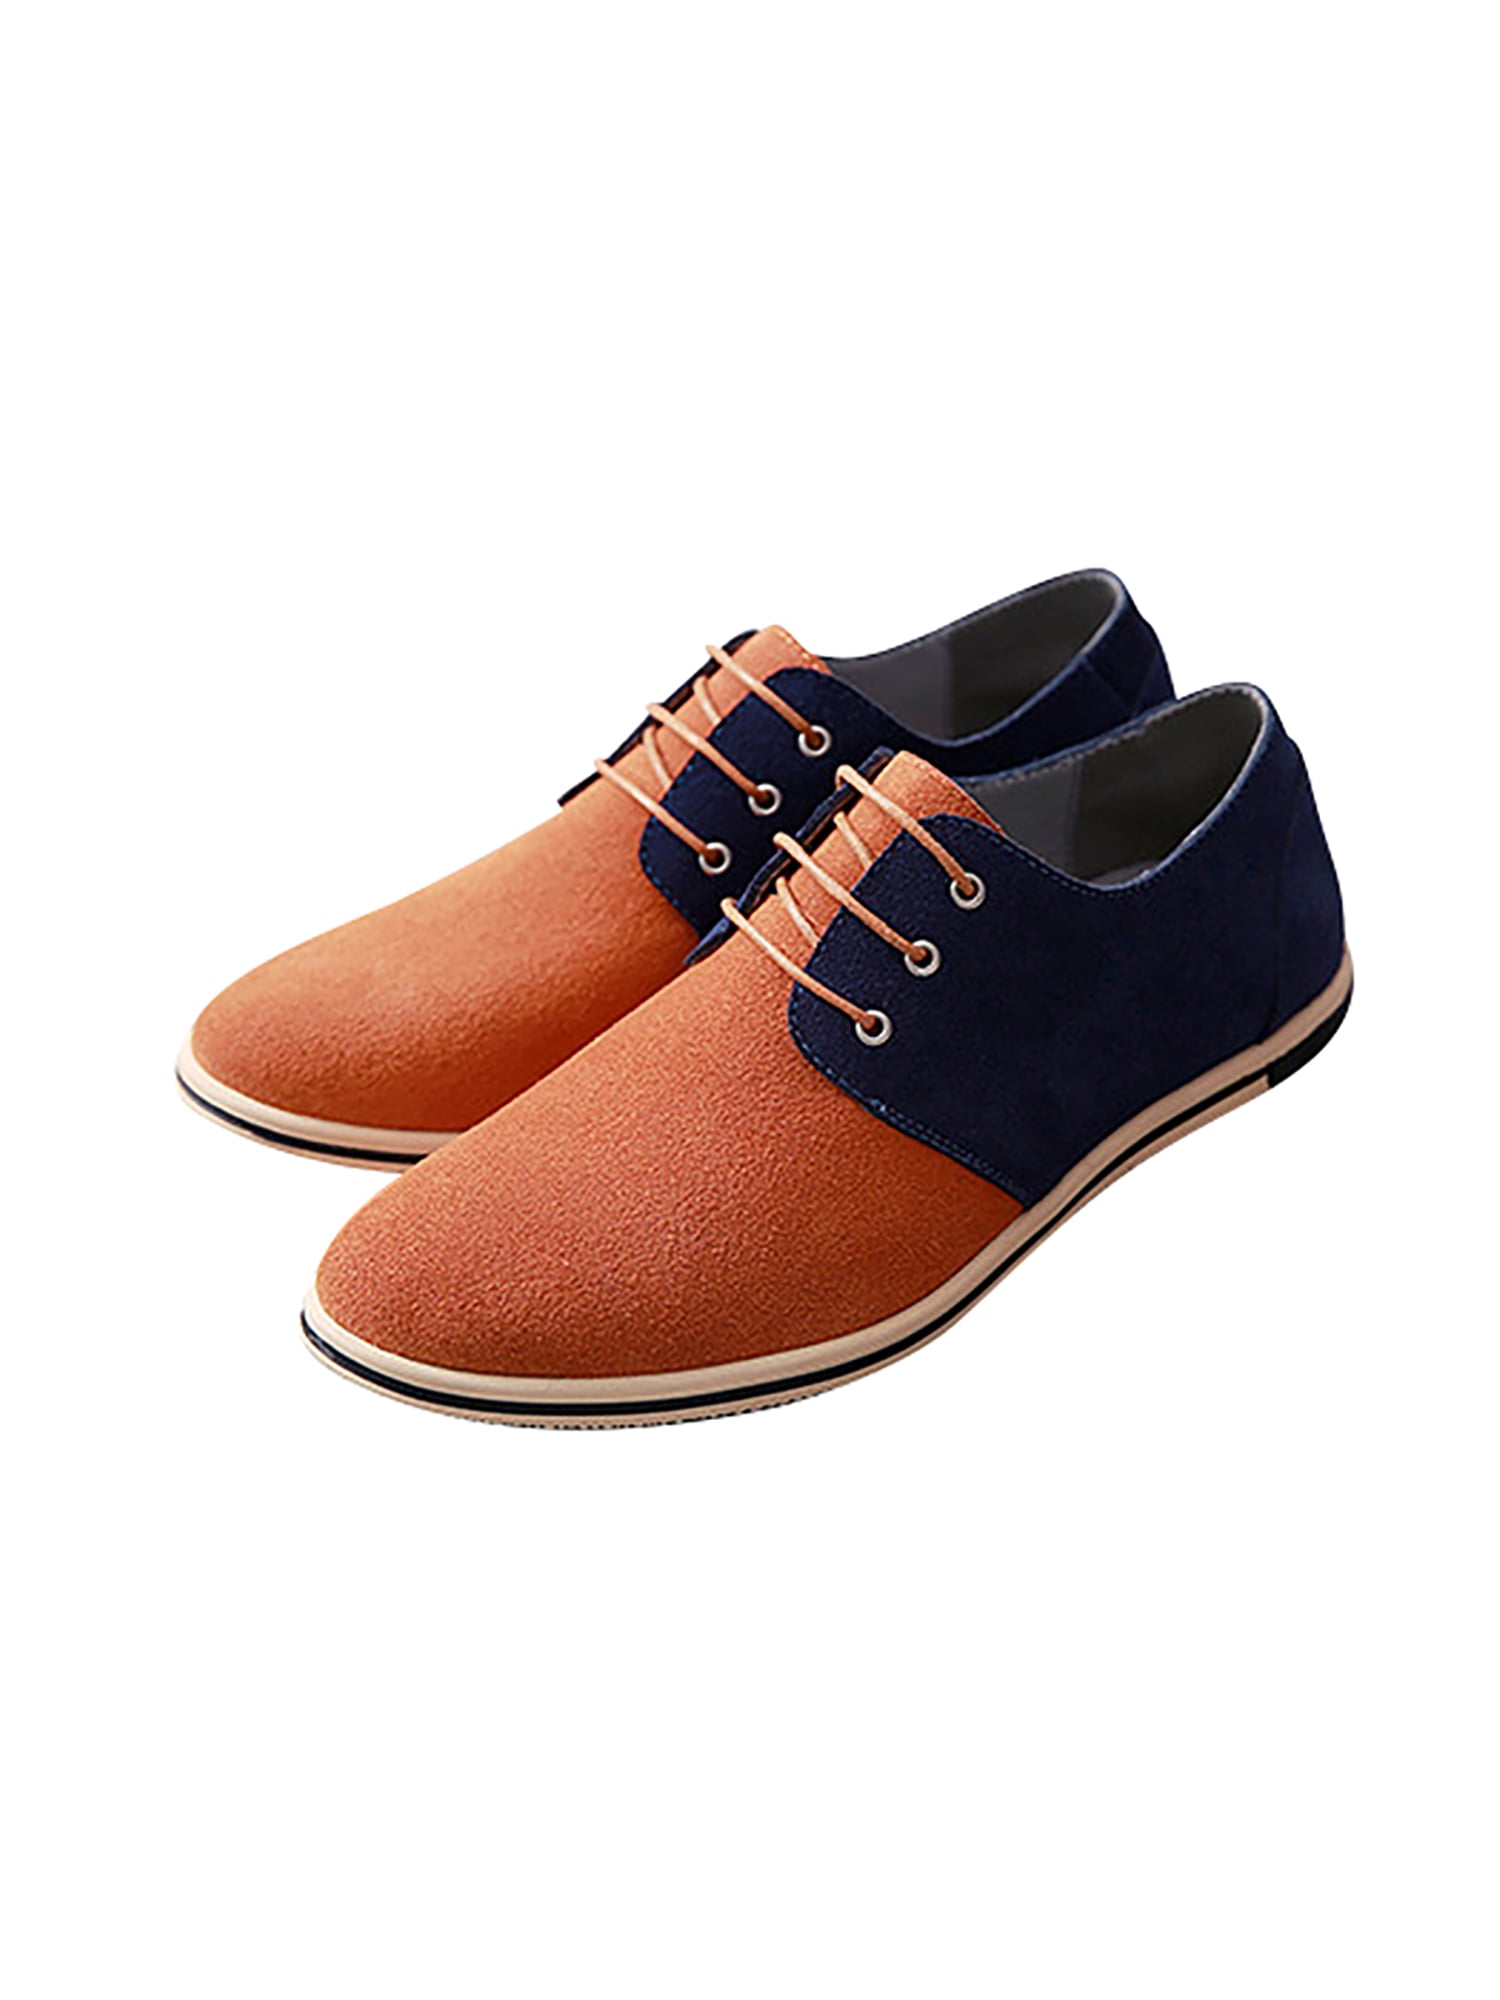 Details about   Retro Mens Dress Formal Real Leather Shoes Lace up Big Round Toe Oxfords Shoes 